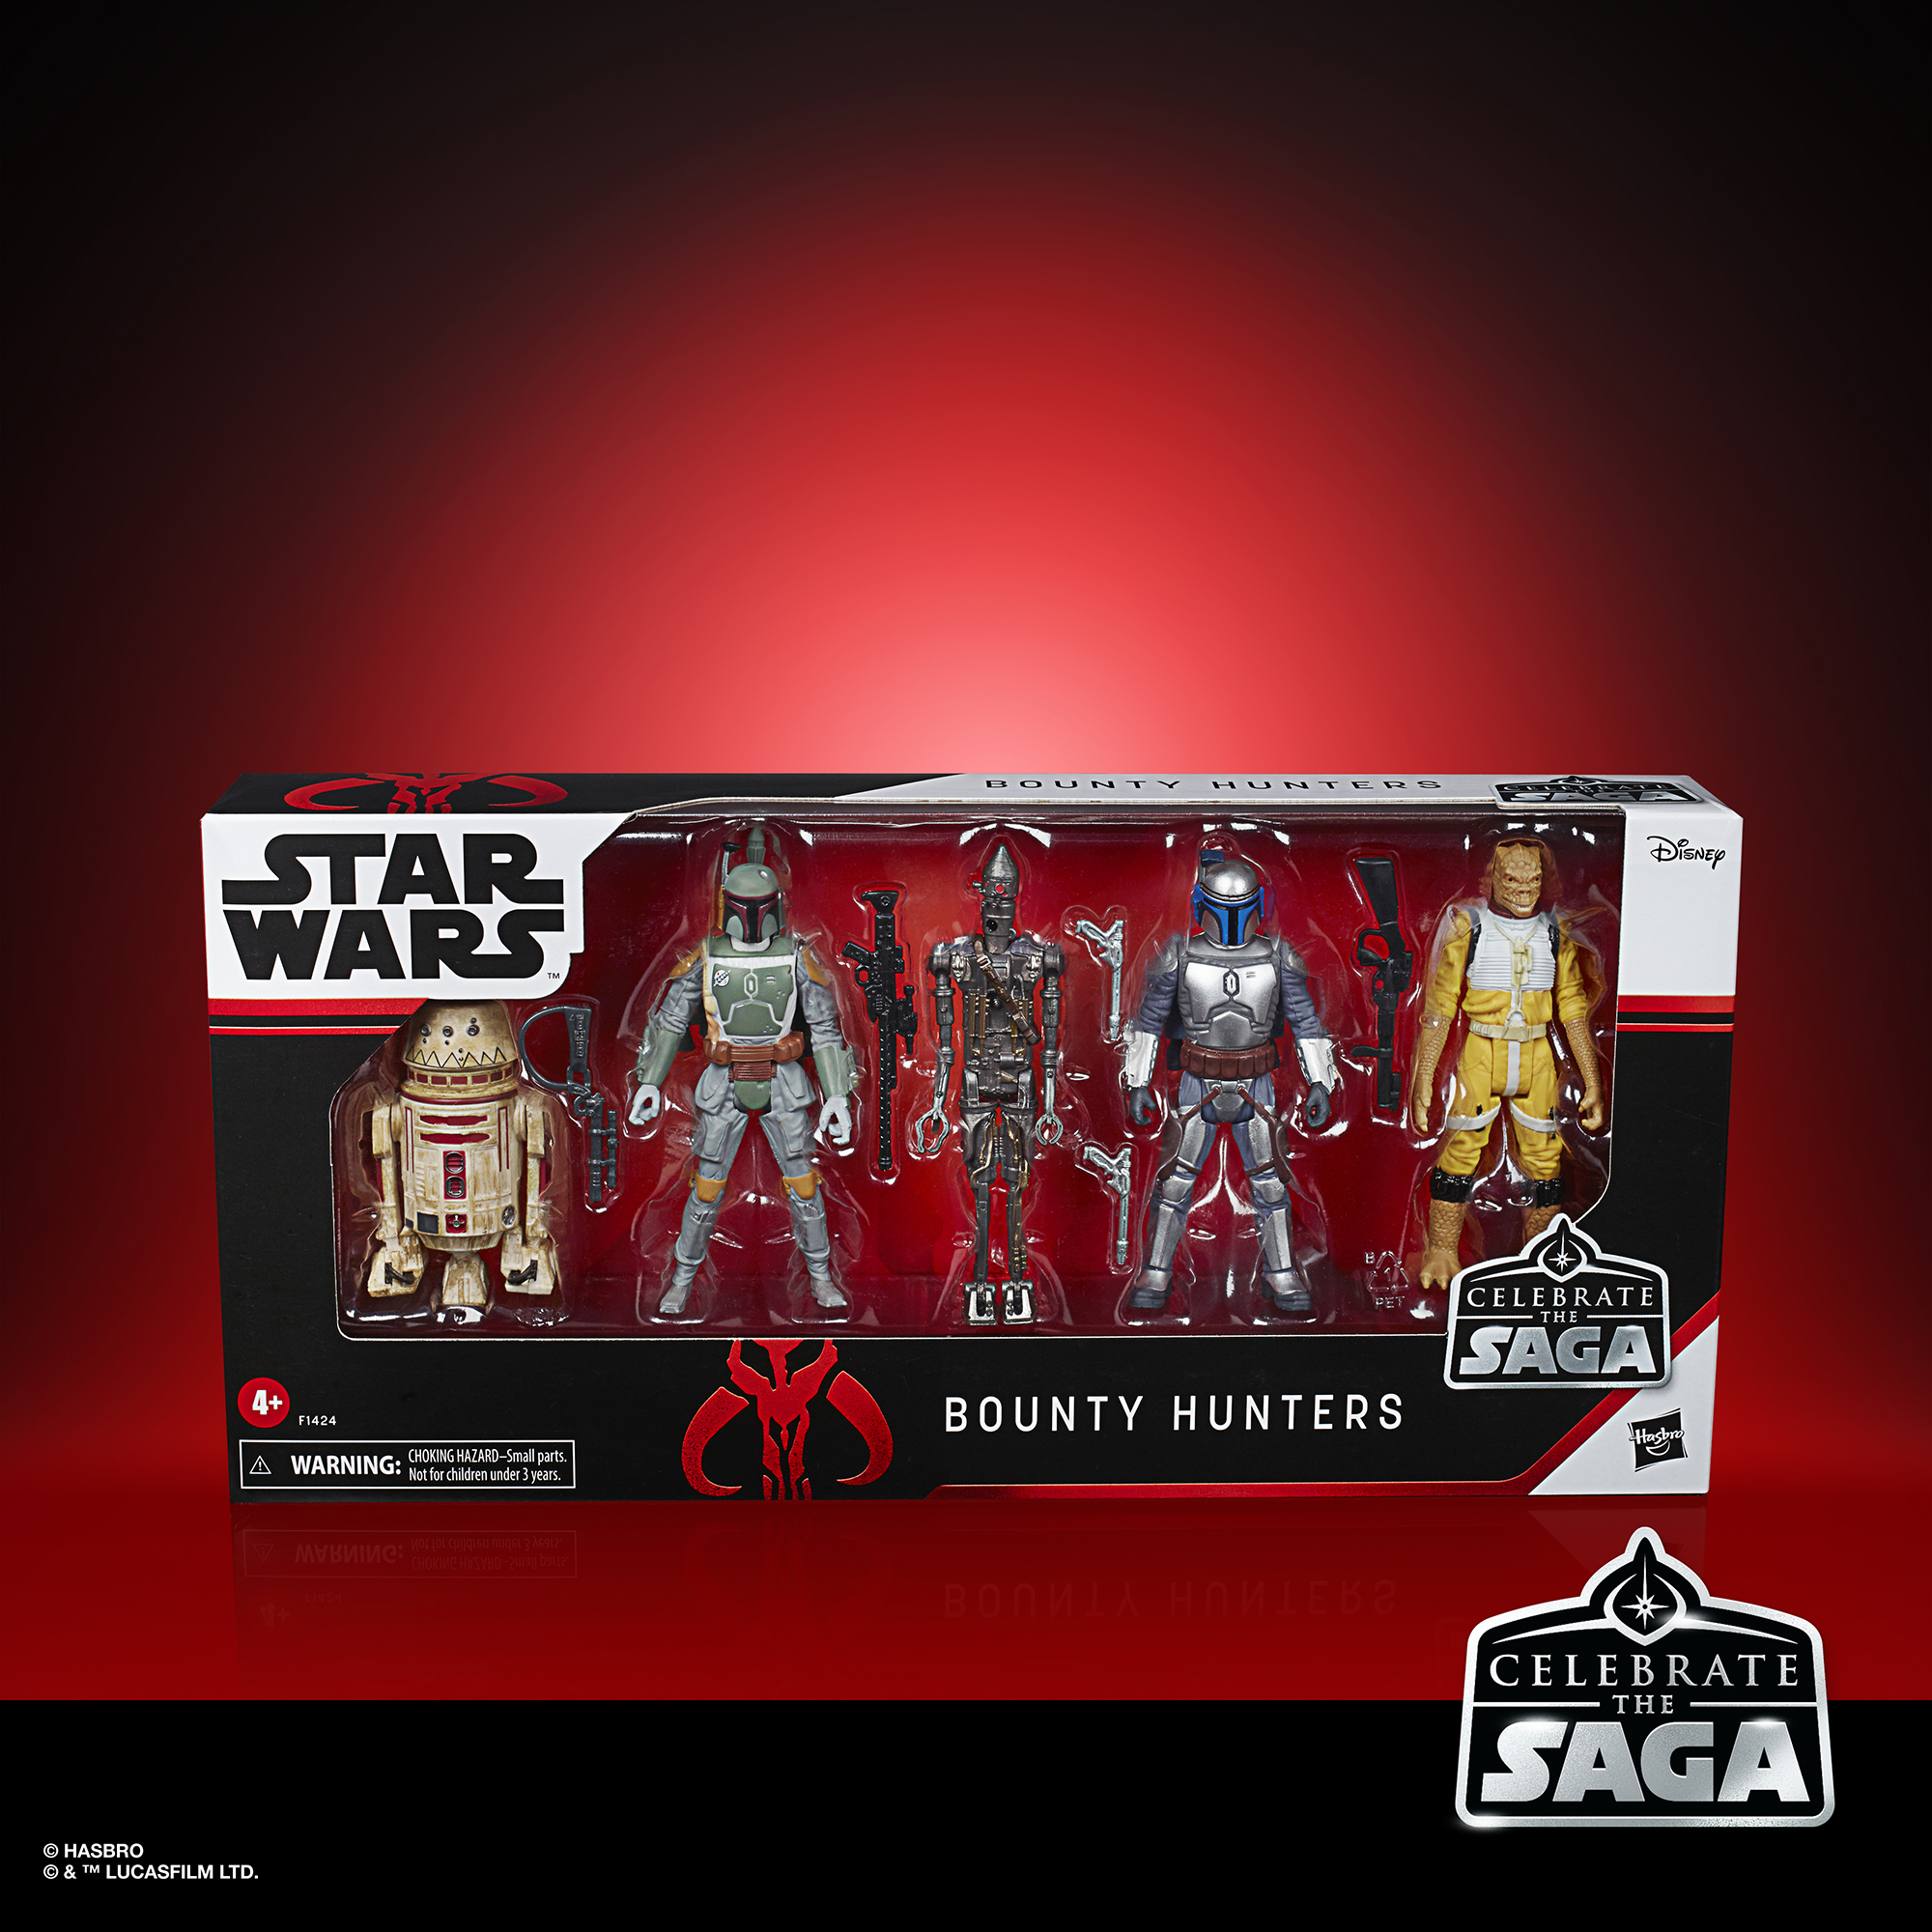 Star Wars Celebrate the Saga Toys Bounty Hunters Action Figure Set, Accessories - image 3 of 7